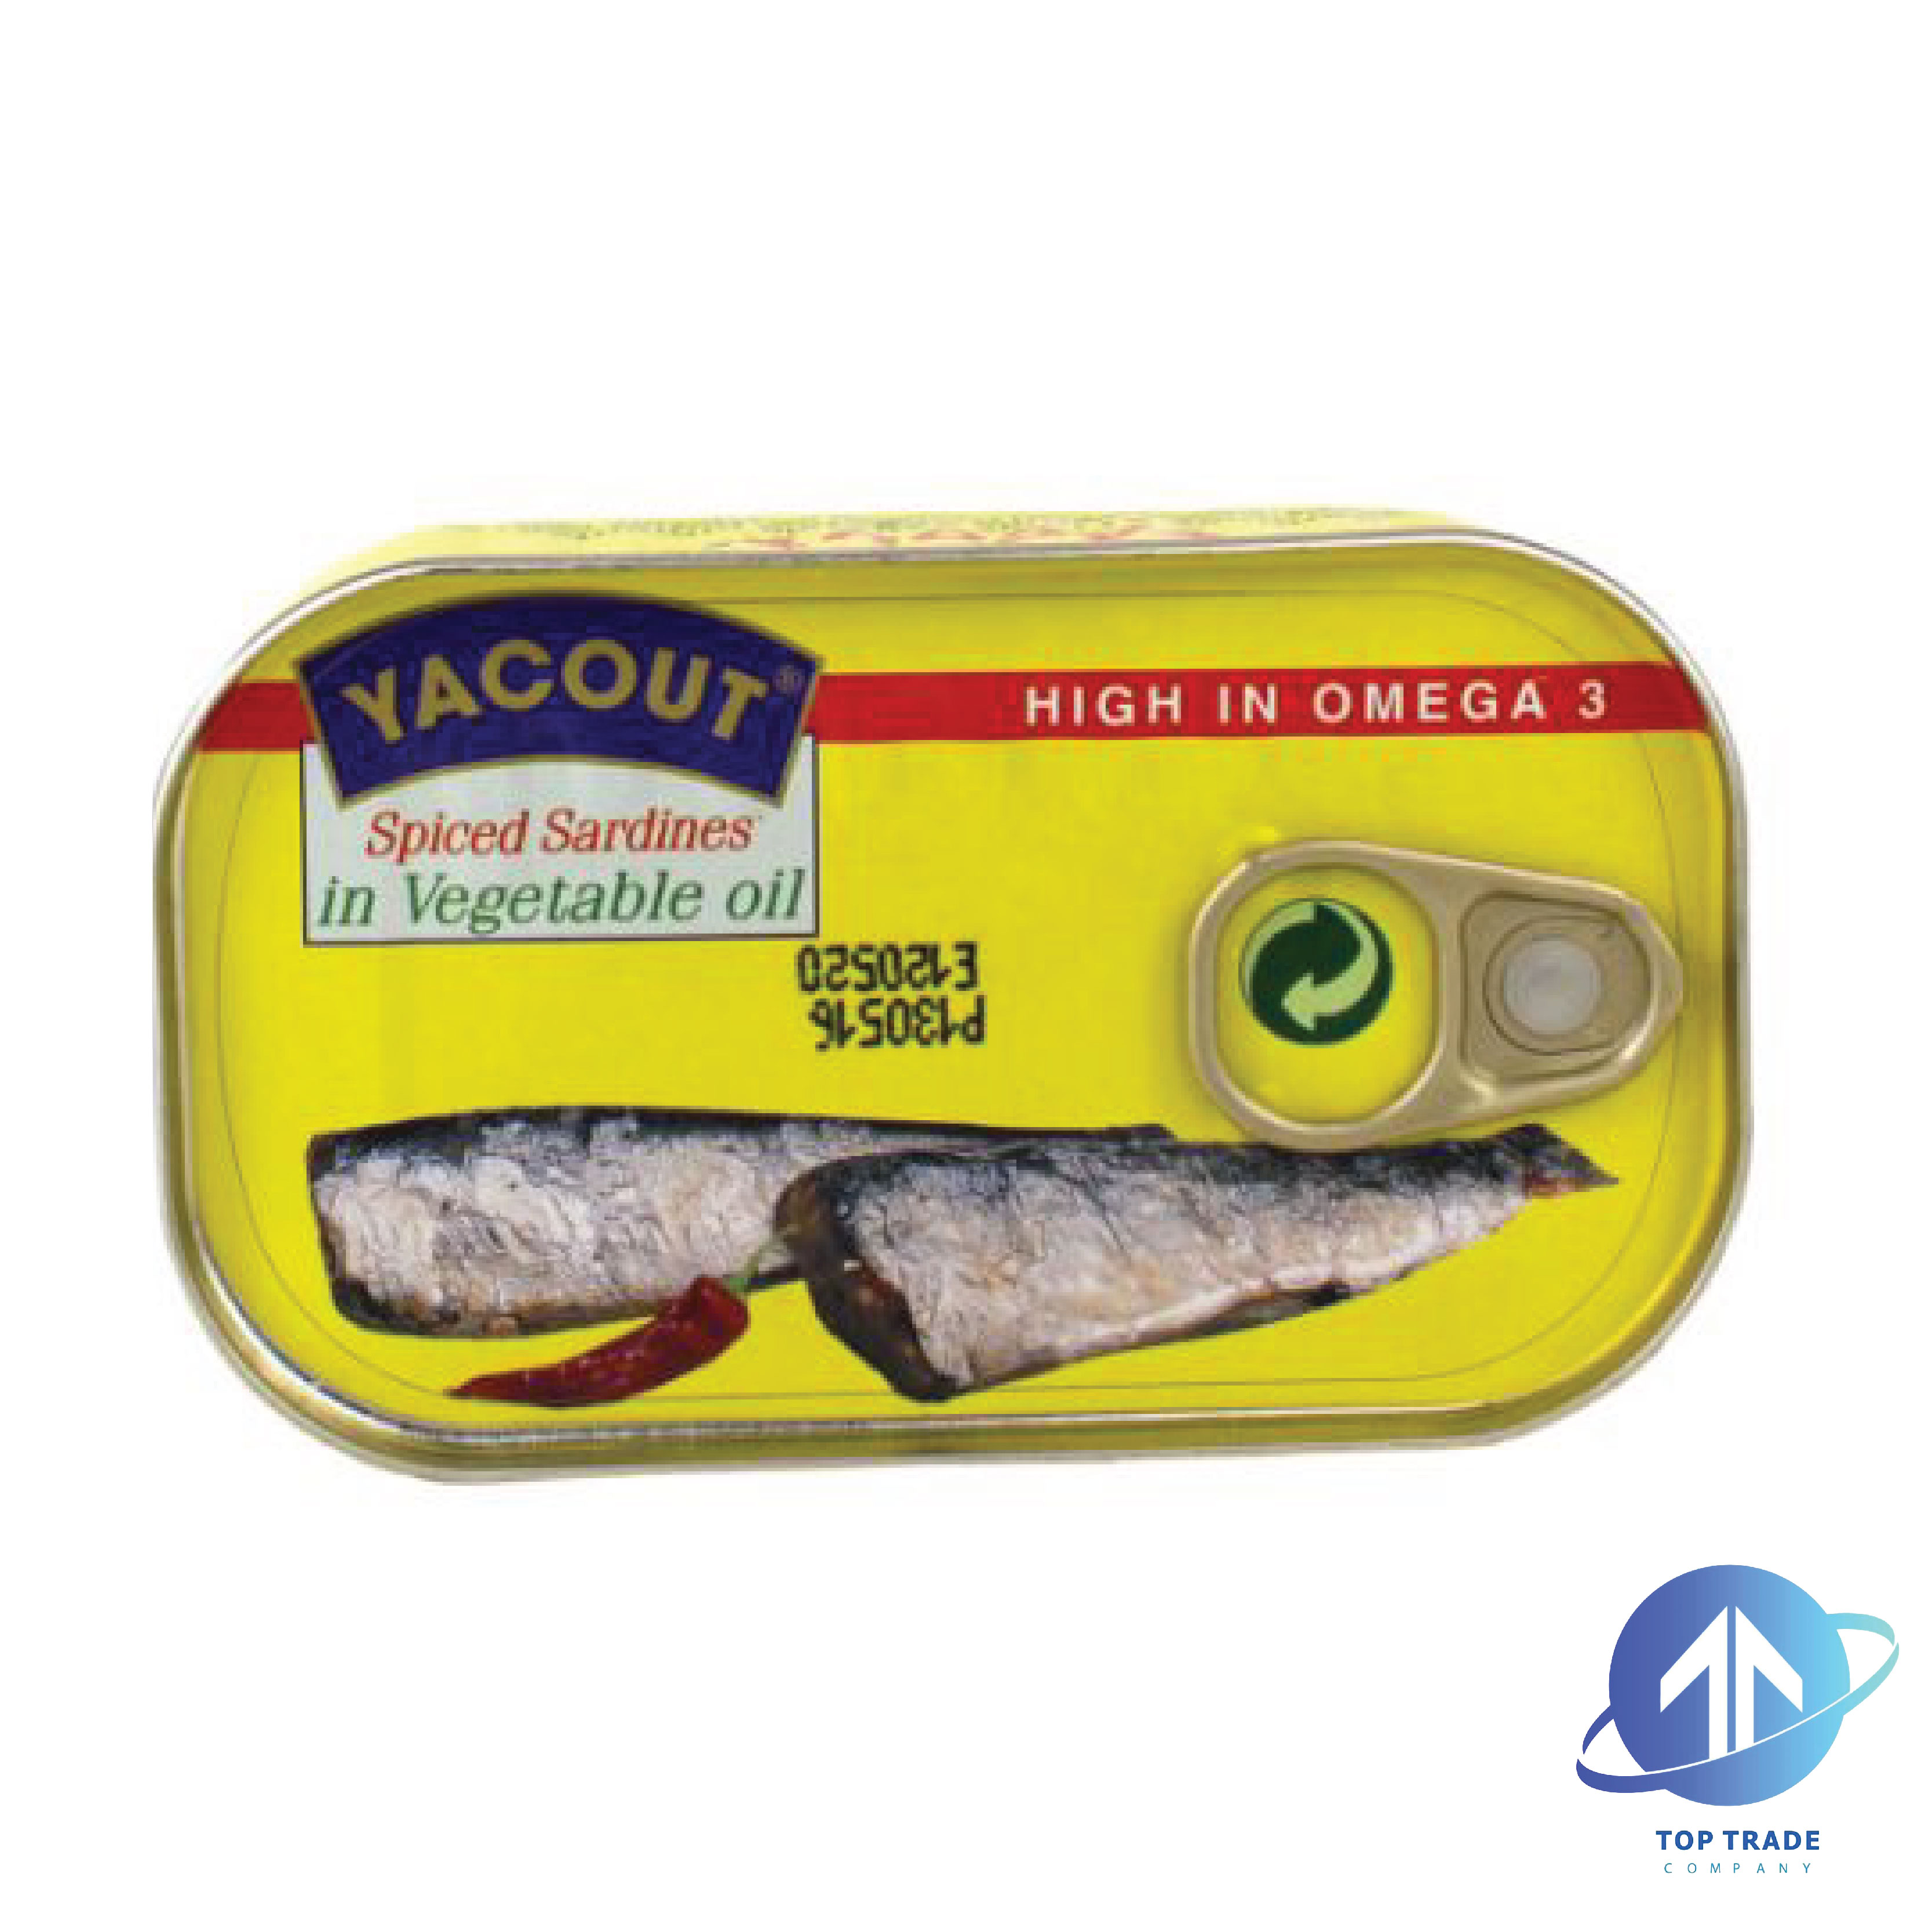 Yacout Hot Sardines in Vegetable Oil 125gr